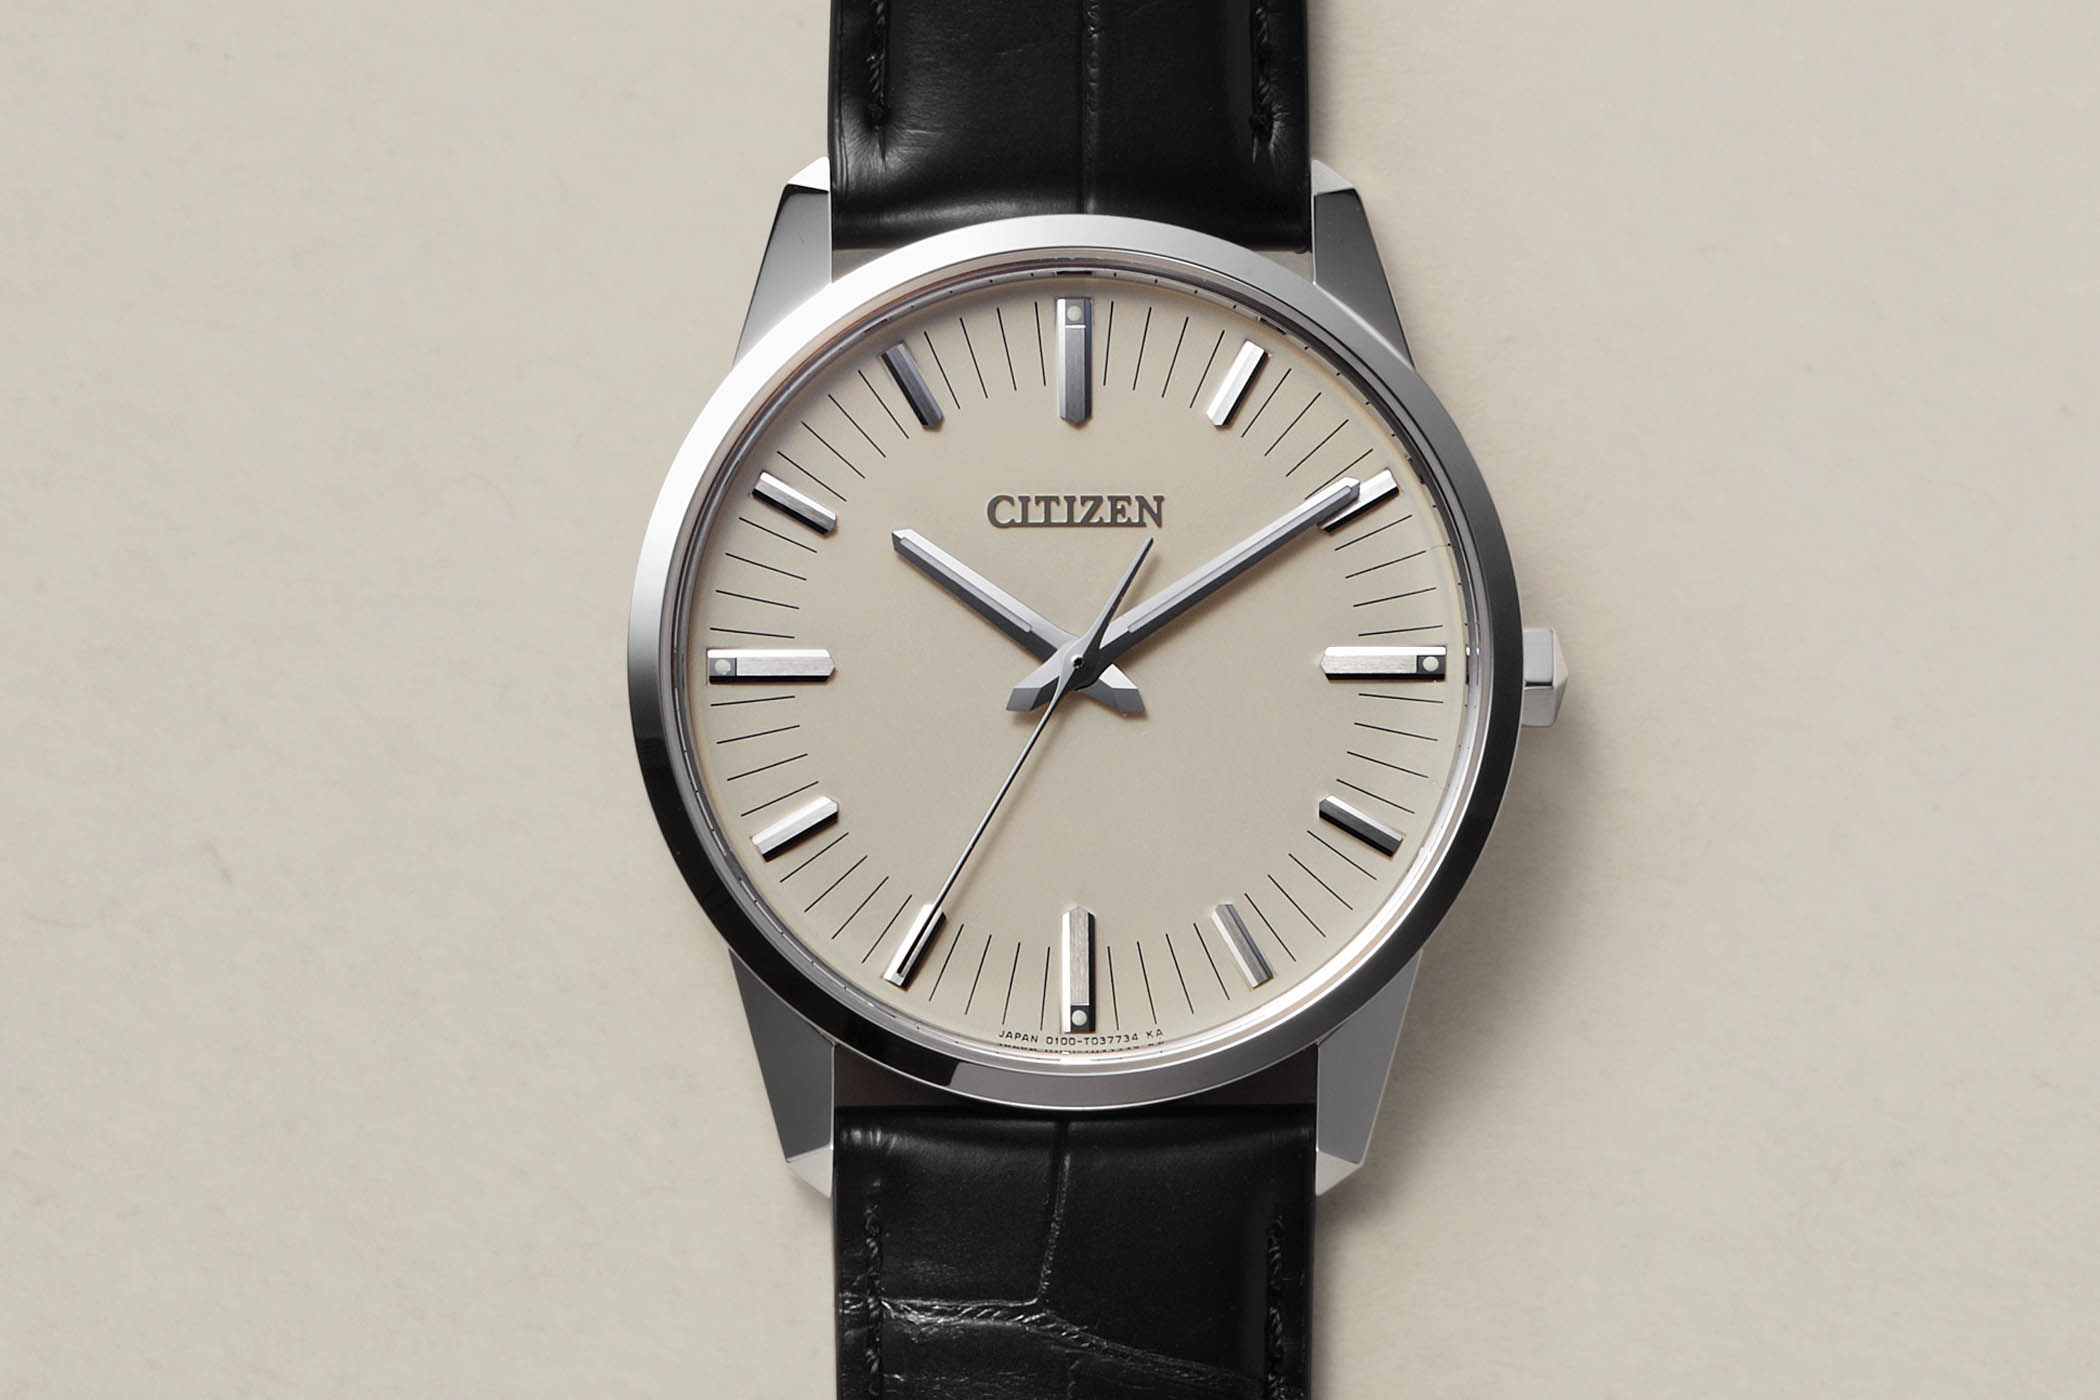 Baselworld 2019: Citizen Eco-Drive Caliber 0100 Watch With +/- 1 Second Per  Year Precision – WristReview.com – Featuring Watch Reviews, Critiques,  Reports & News